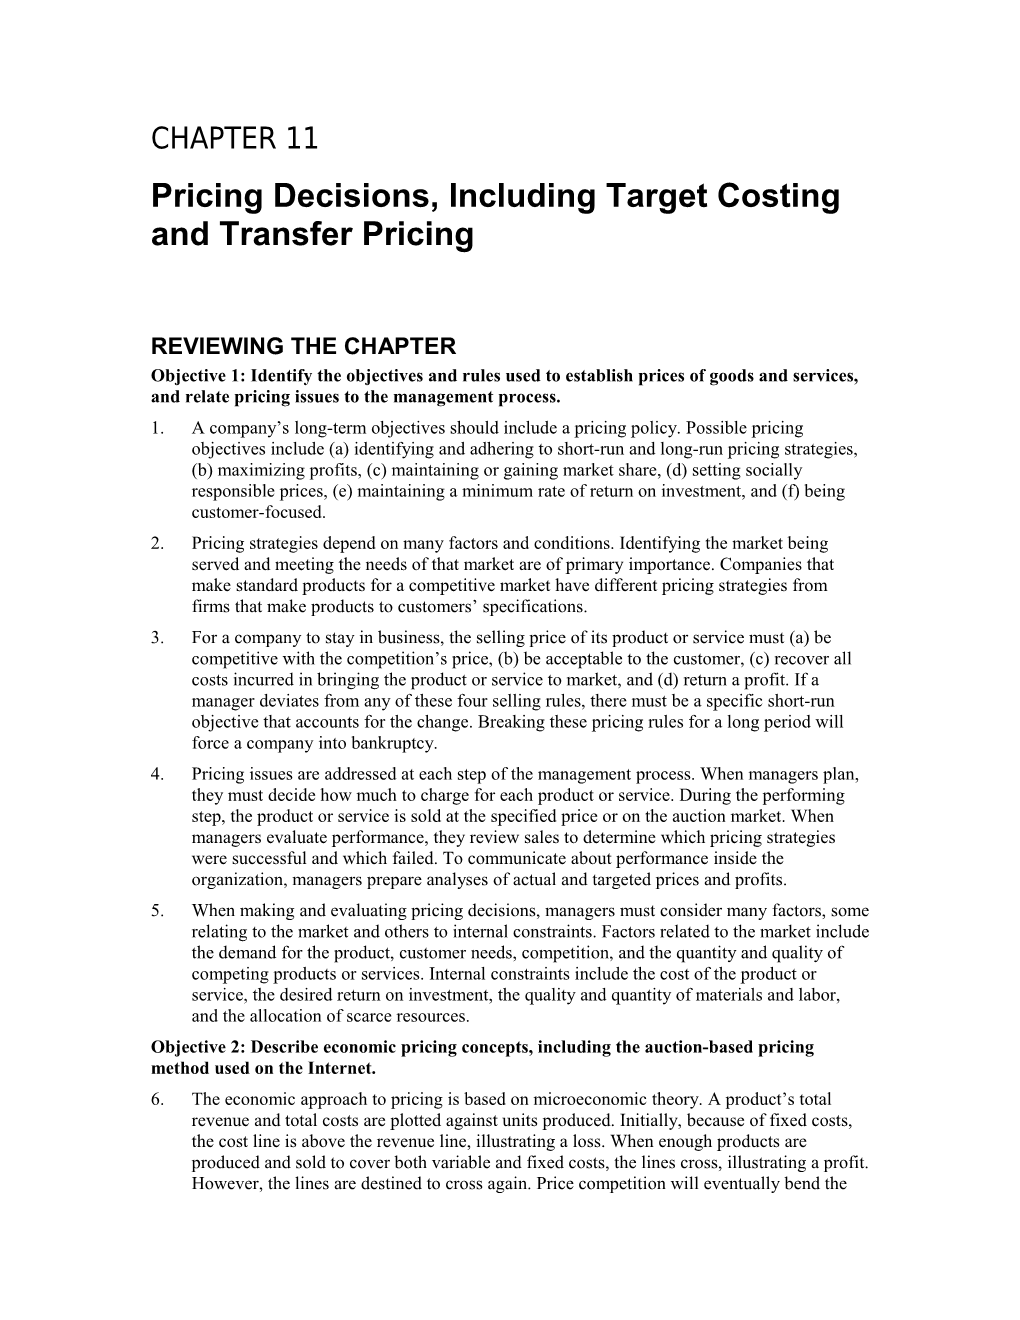 Pricing Decisions, Including Target Costing and Transfer Pricing